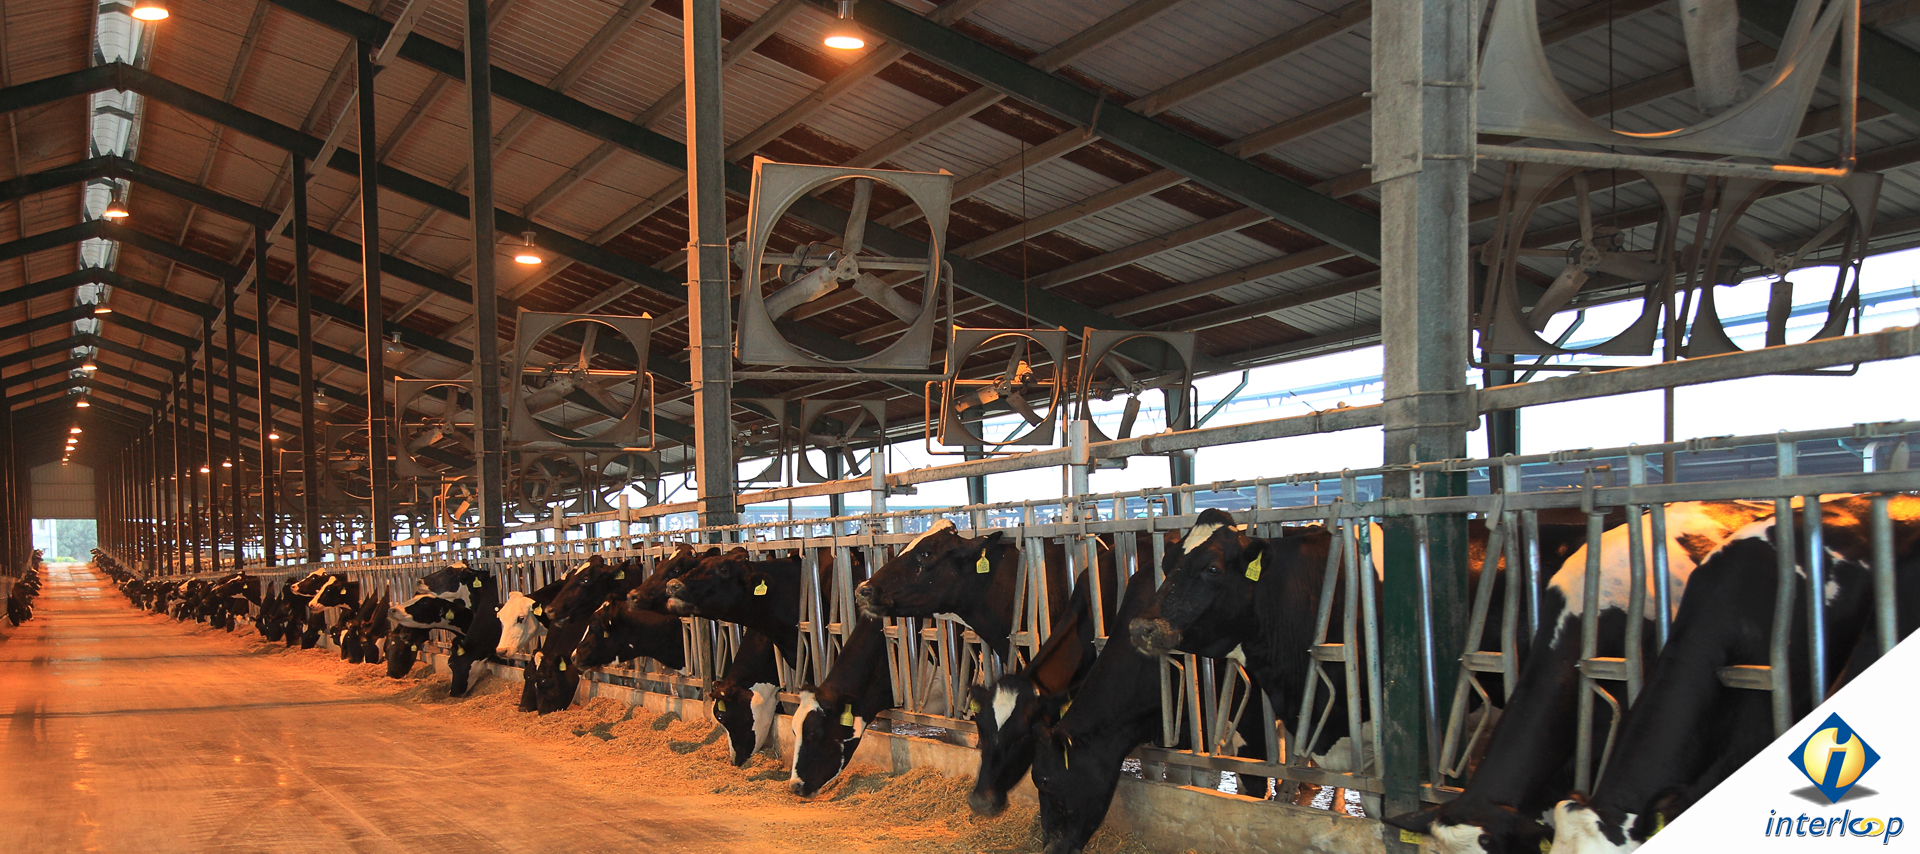 A Growing Dairy Business With The Highest Quality Products